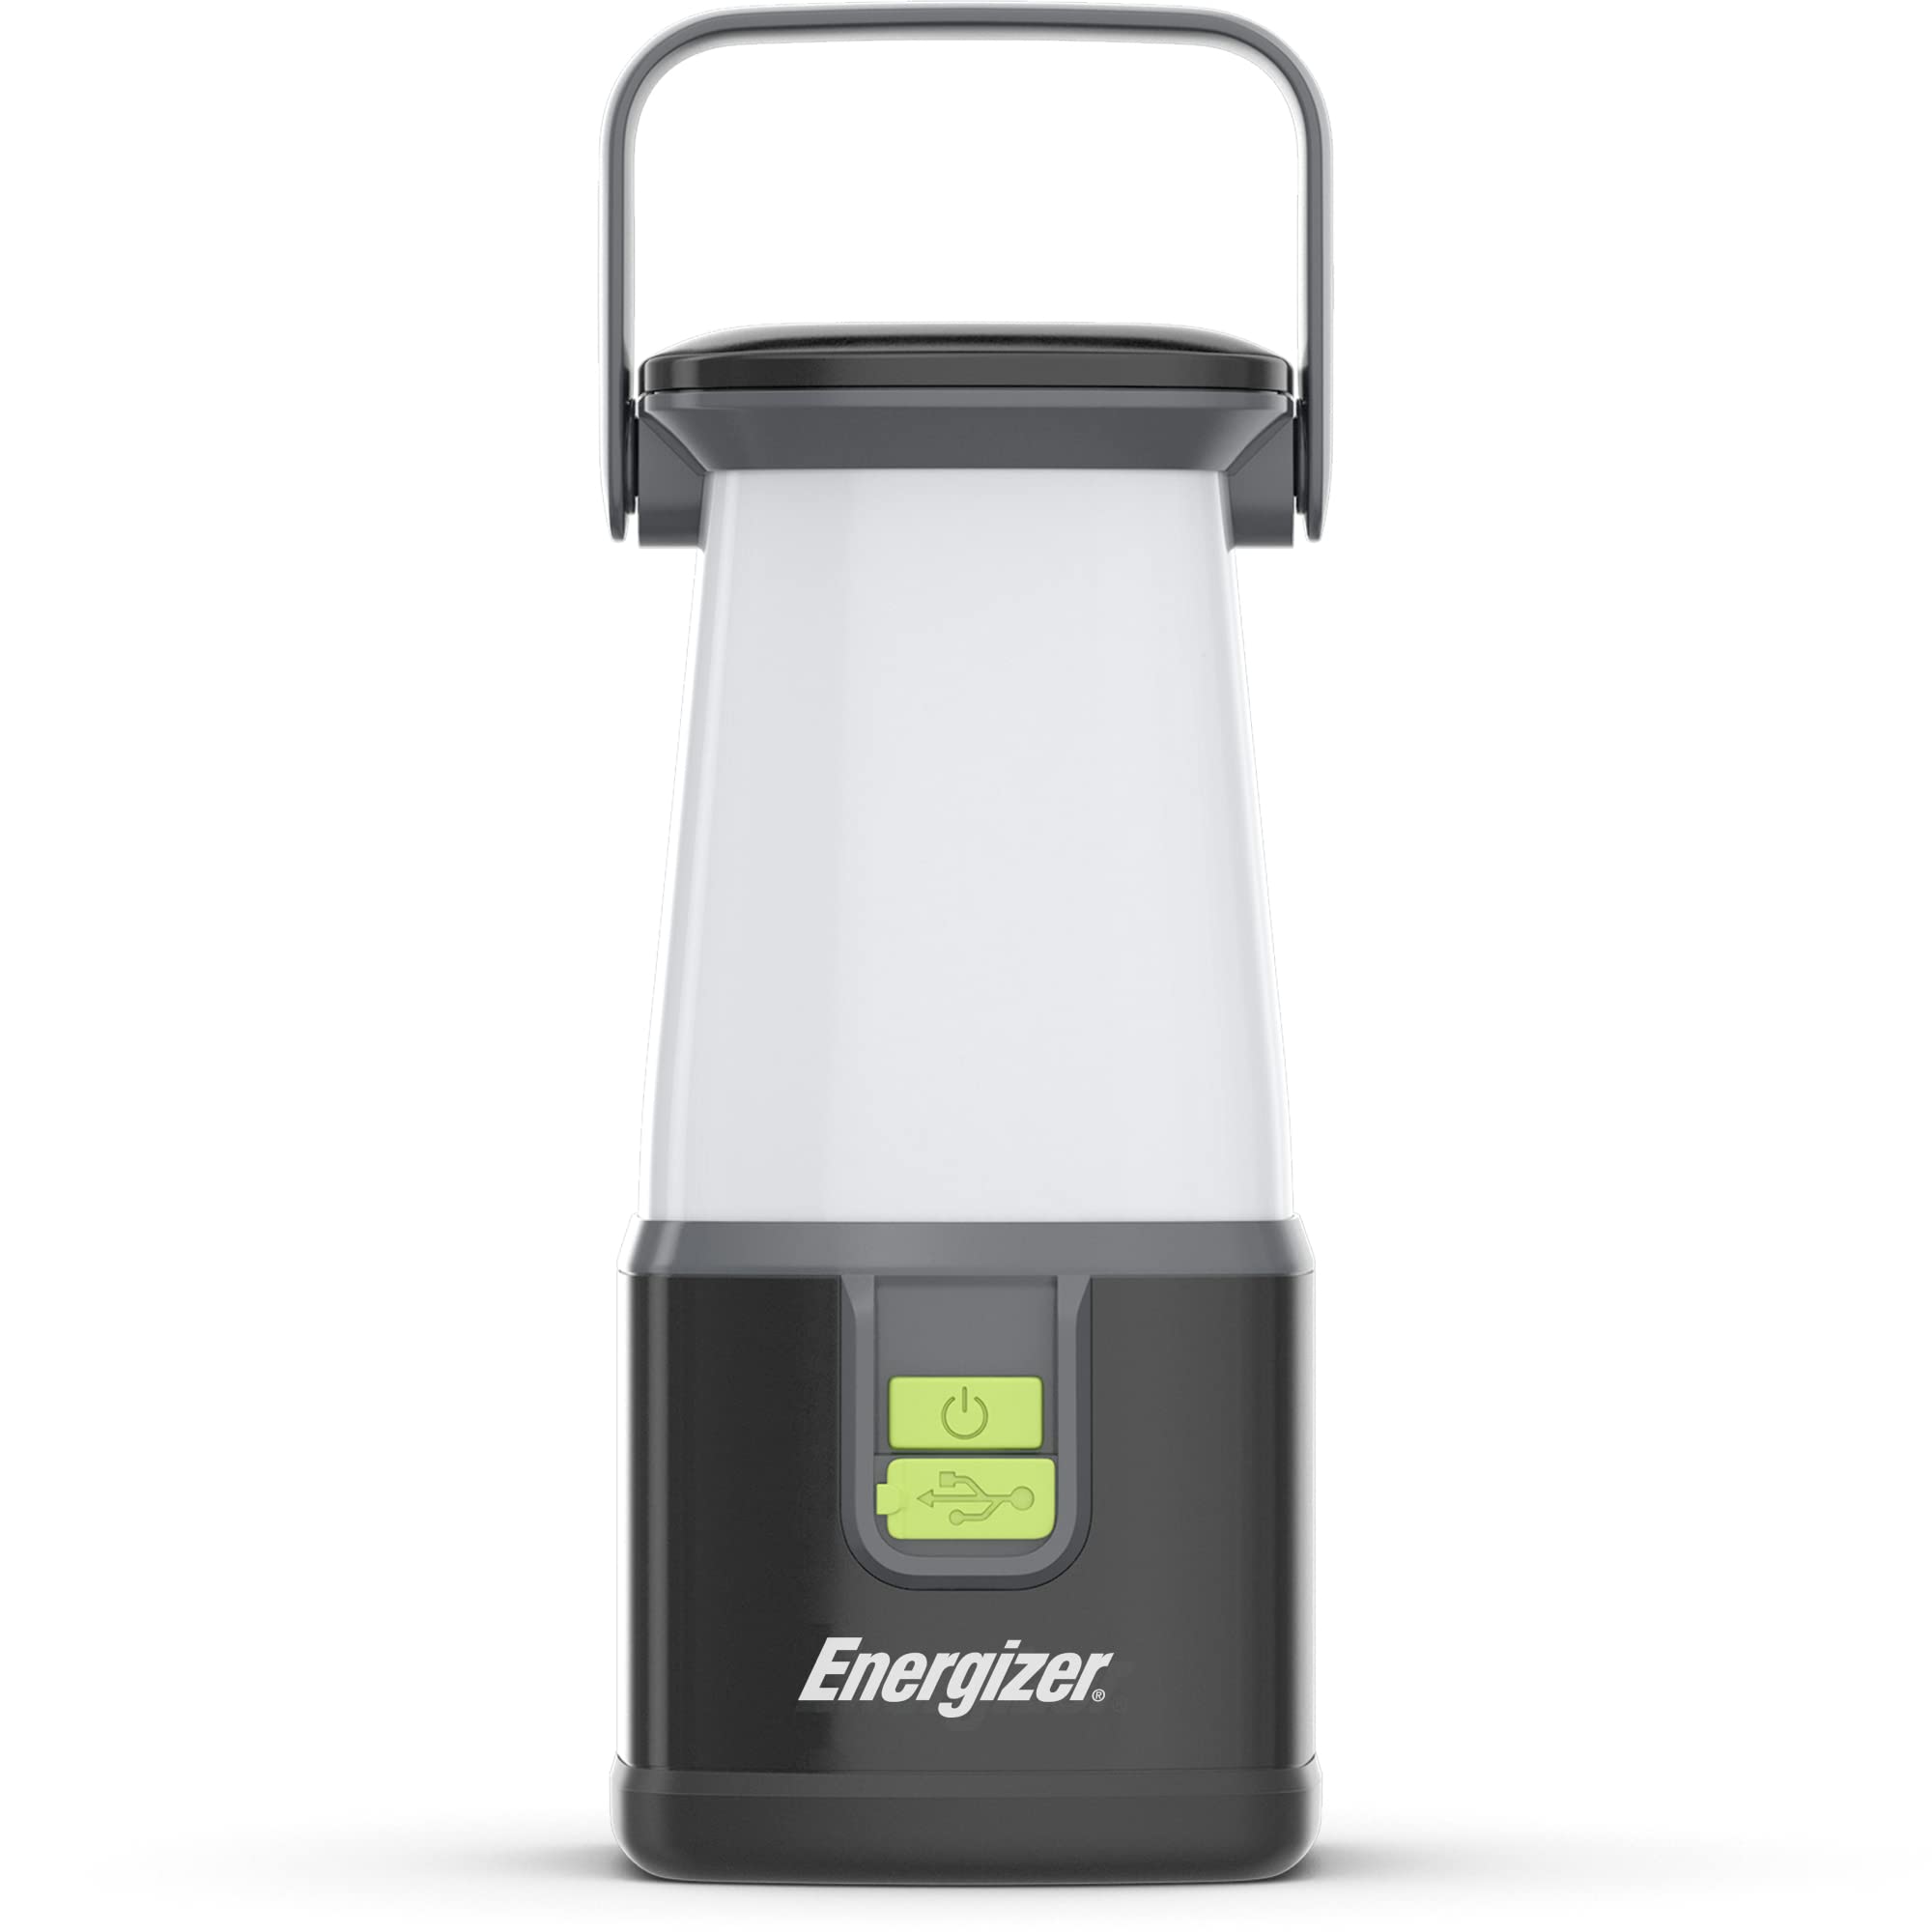 Energizer 360 Pro Water-Resistant LED Tabletop Camping Lantern (Black/White) $8.16 + Free Shipping w/ Prime or on $35+